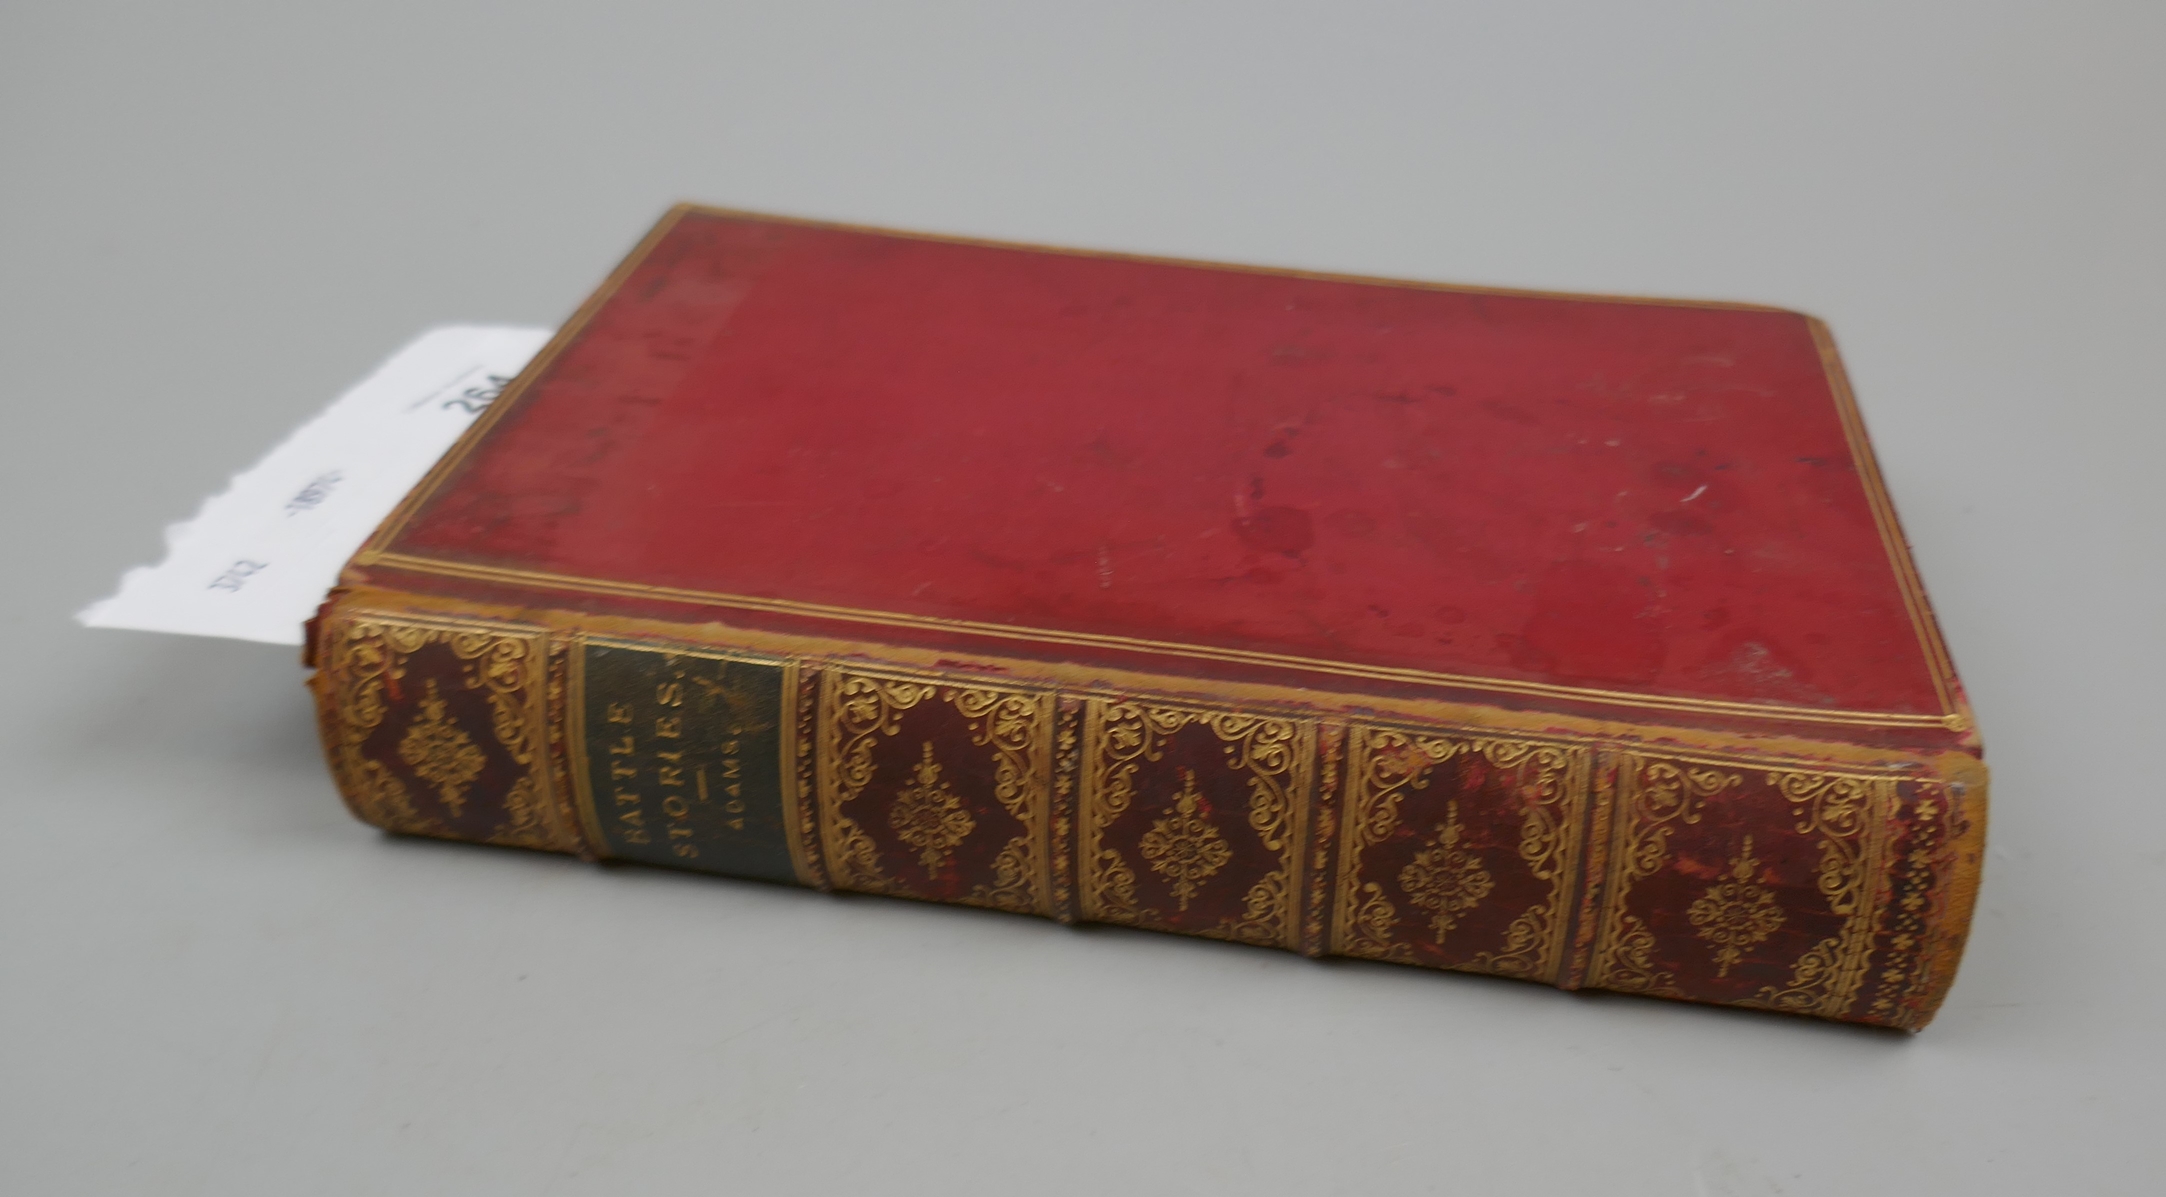 Leather bound book - Battle Stories by W H Davenport Adams